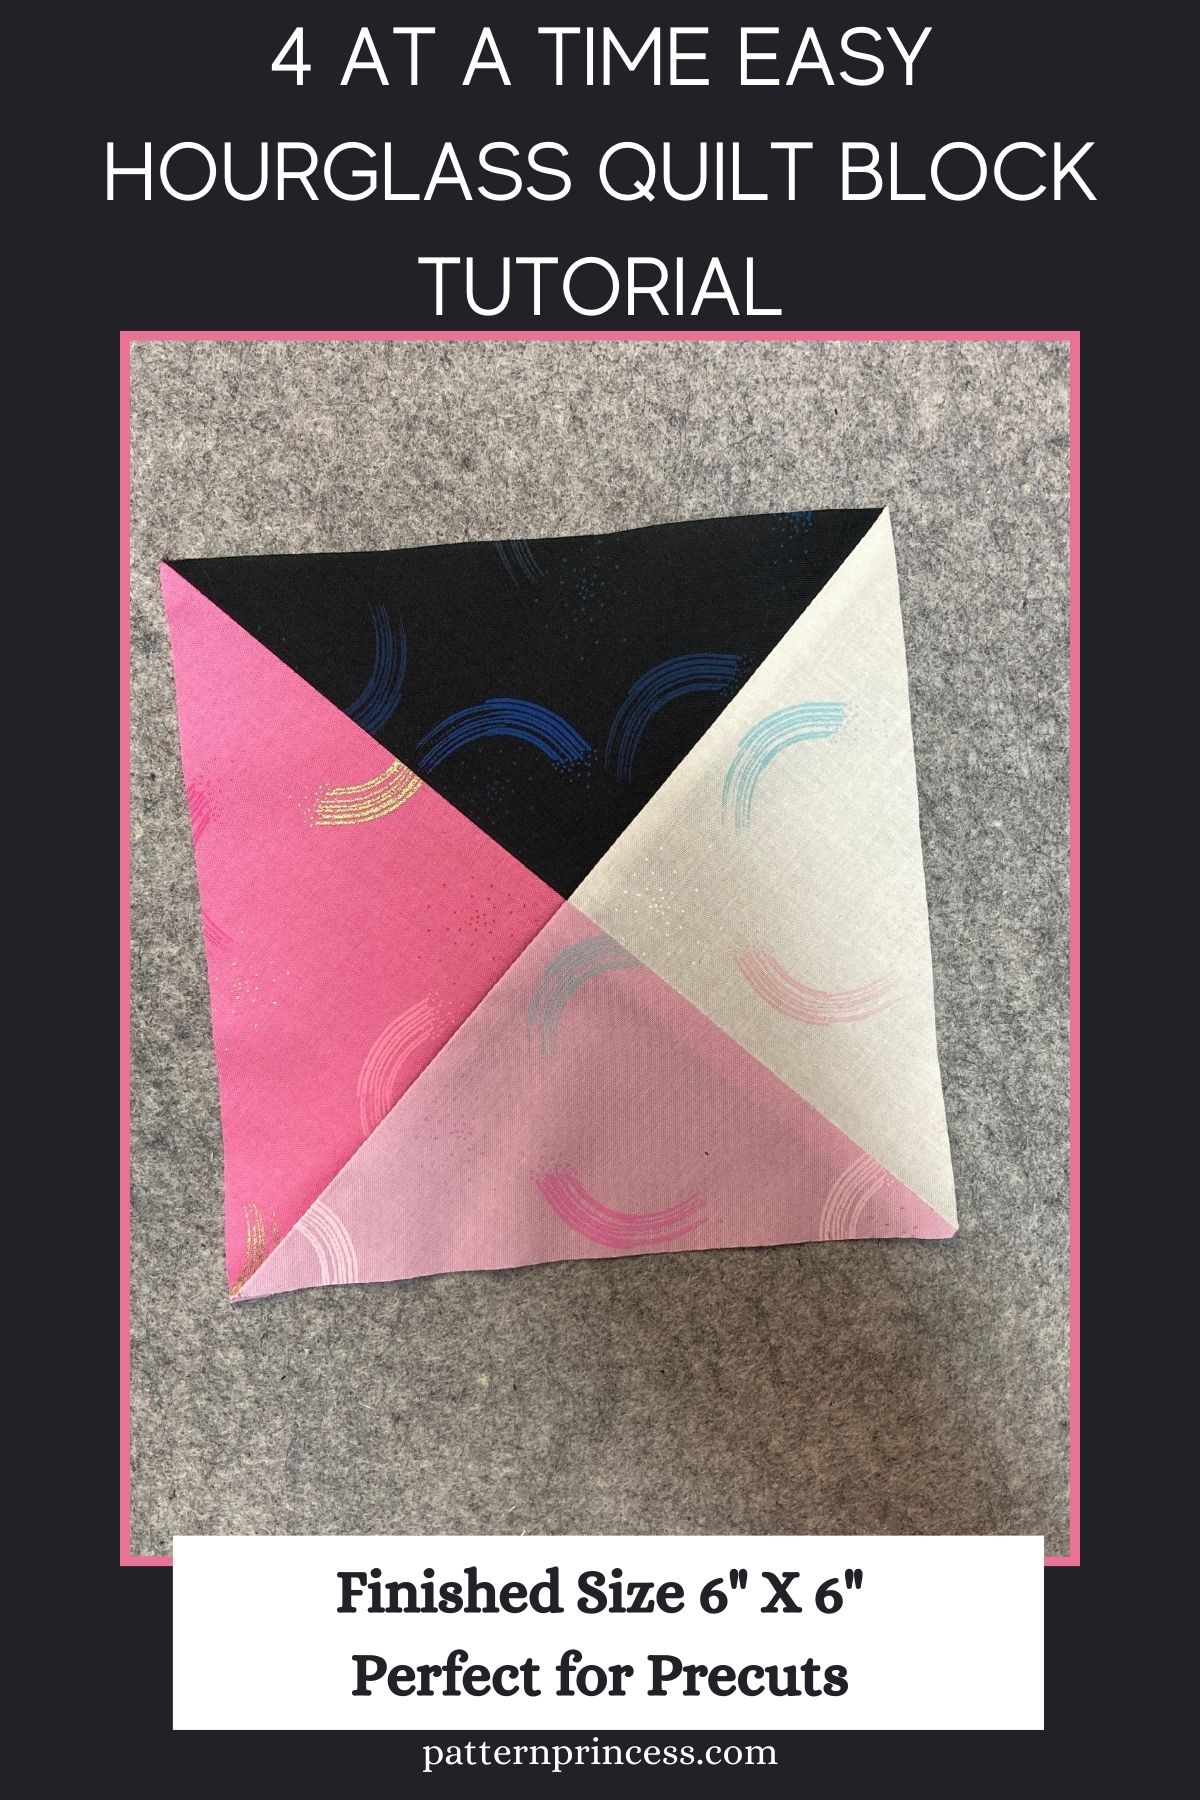 4 At a Time Easy Hourglass Quilt Block Tutorial